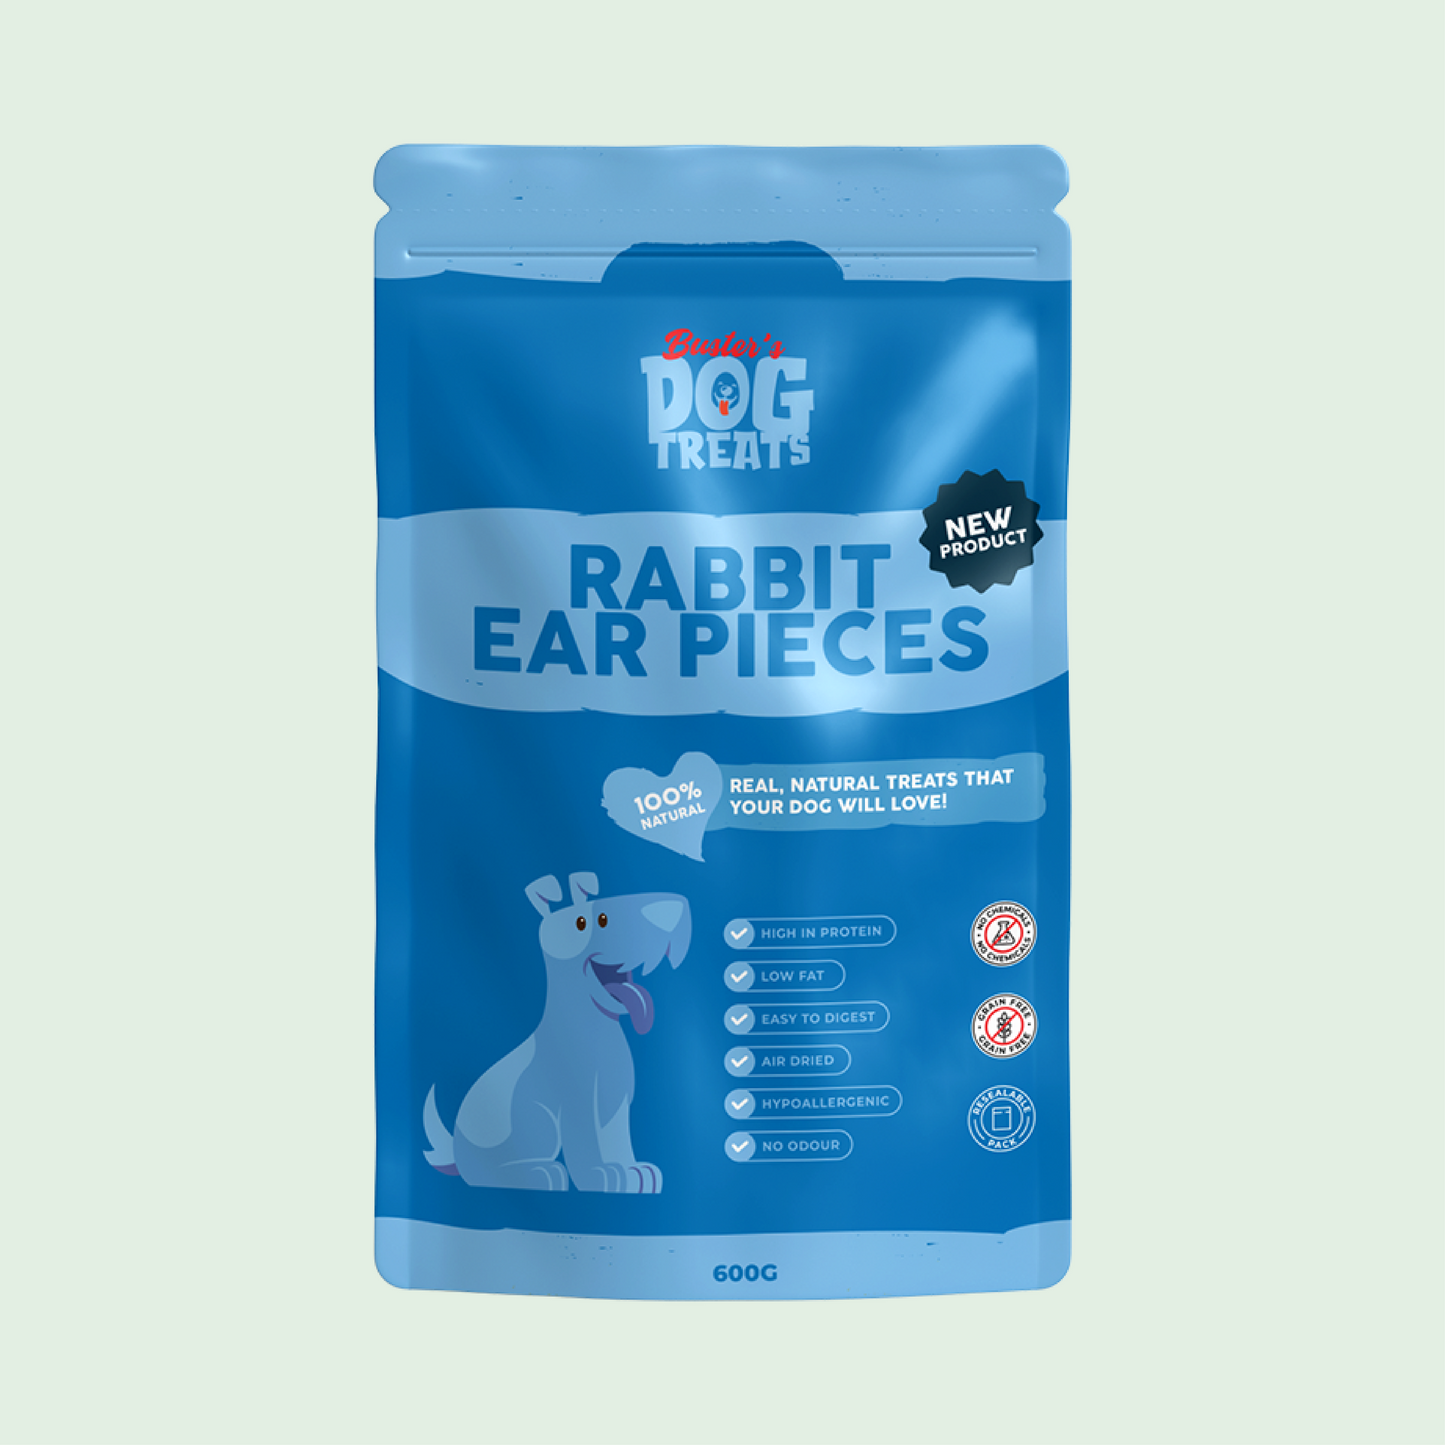 Rabbit Ear Pieces for Dogs